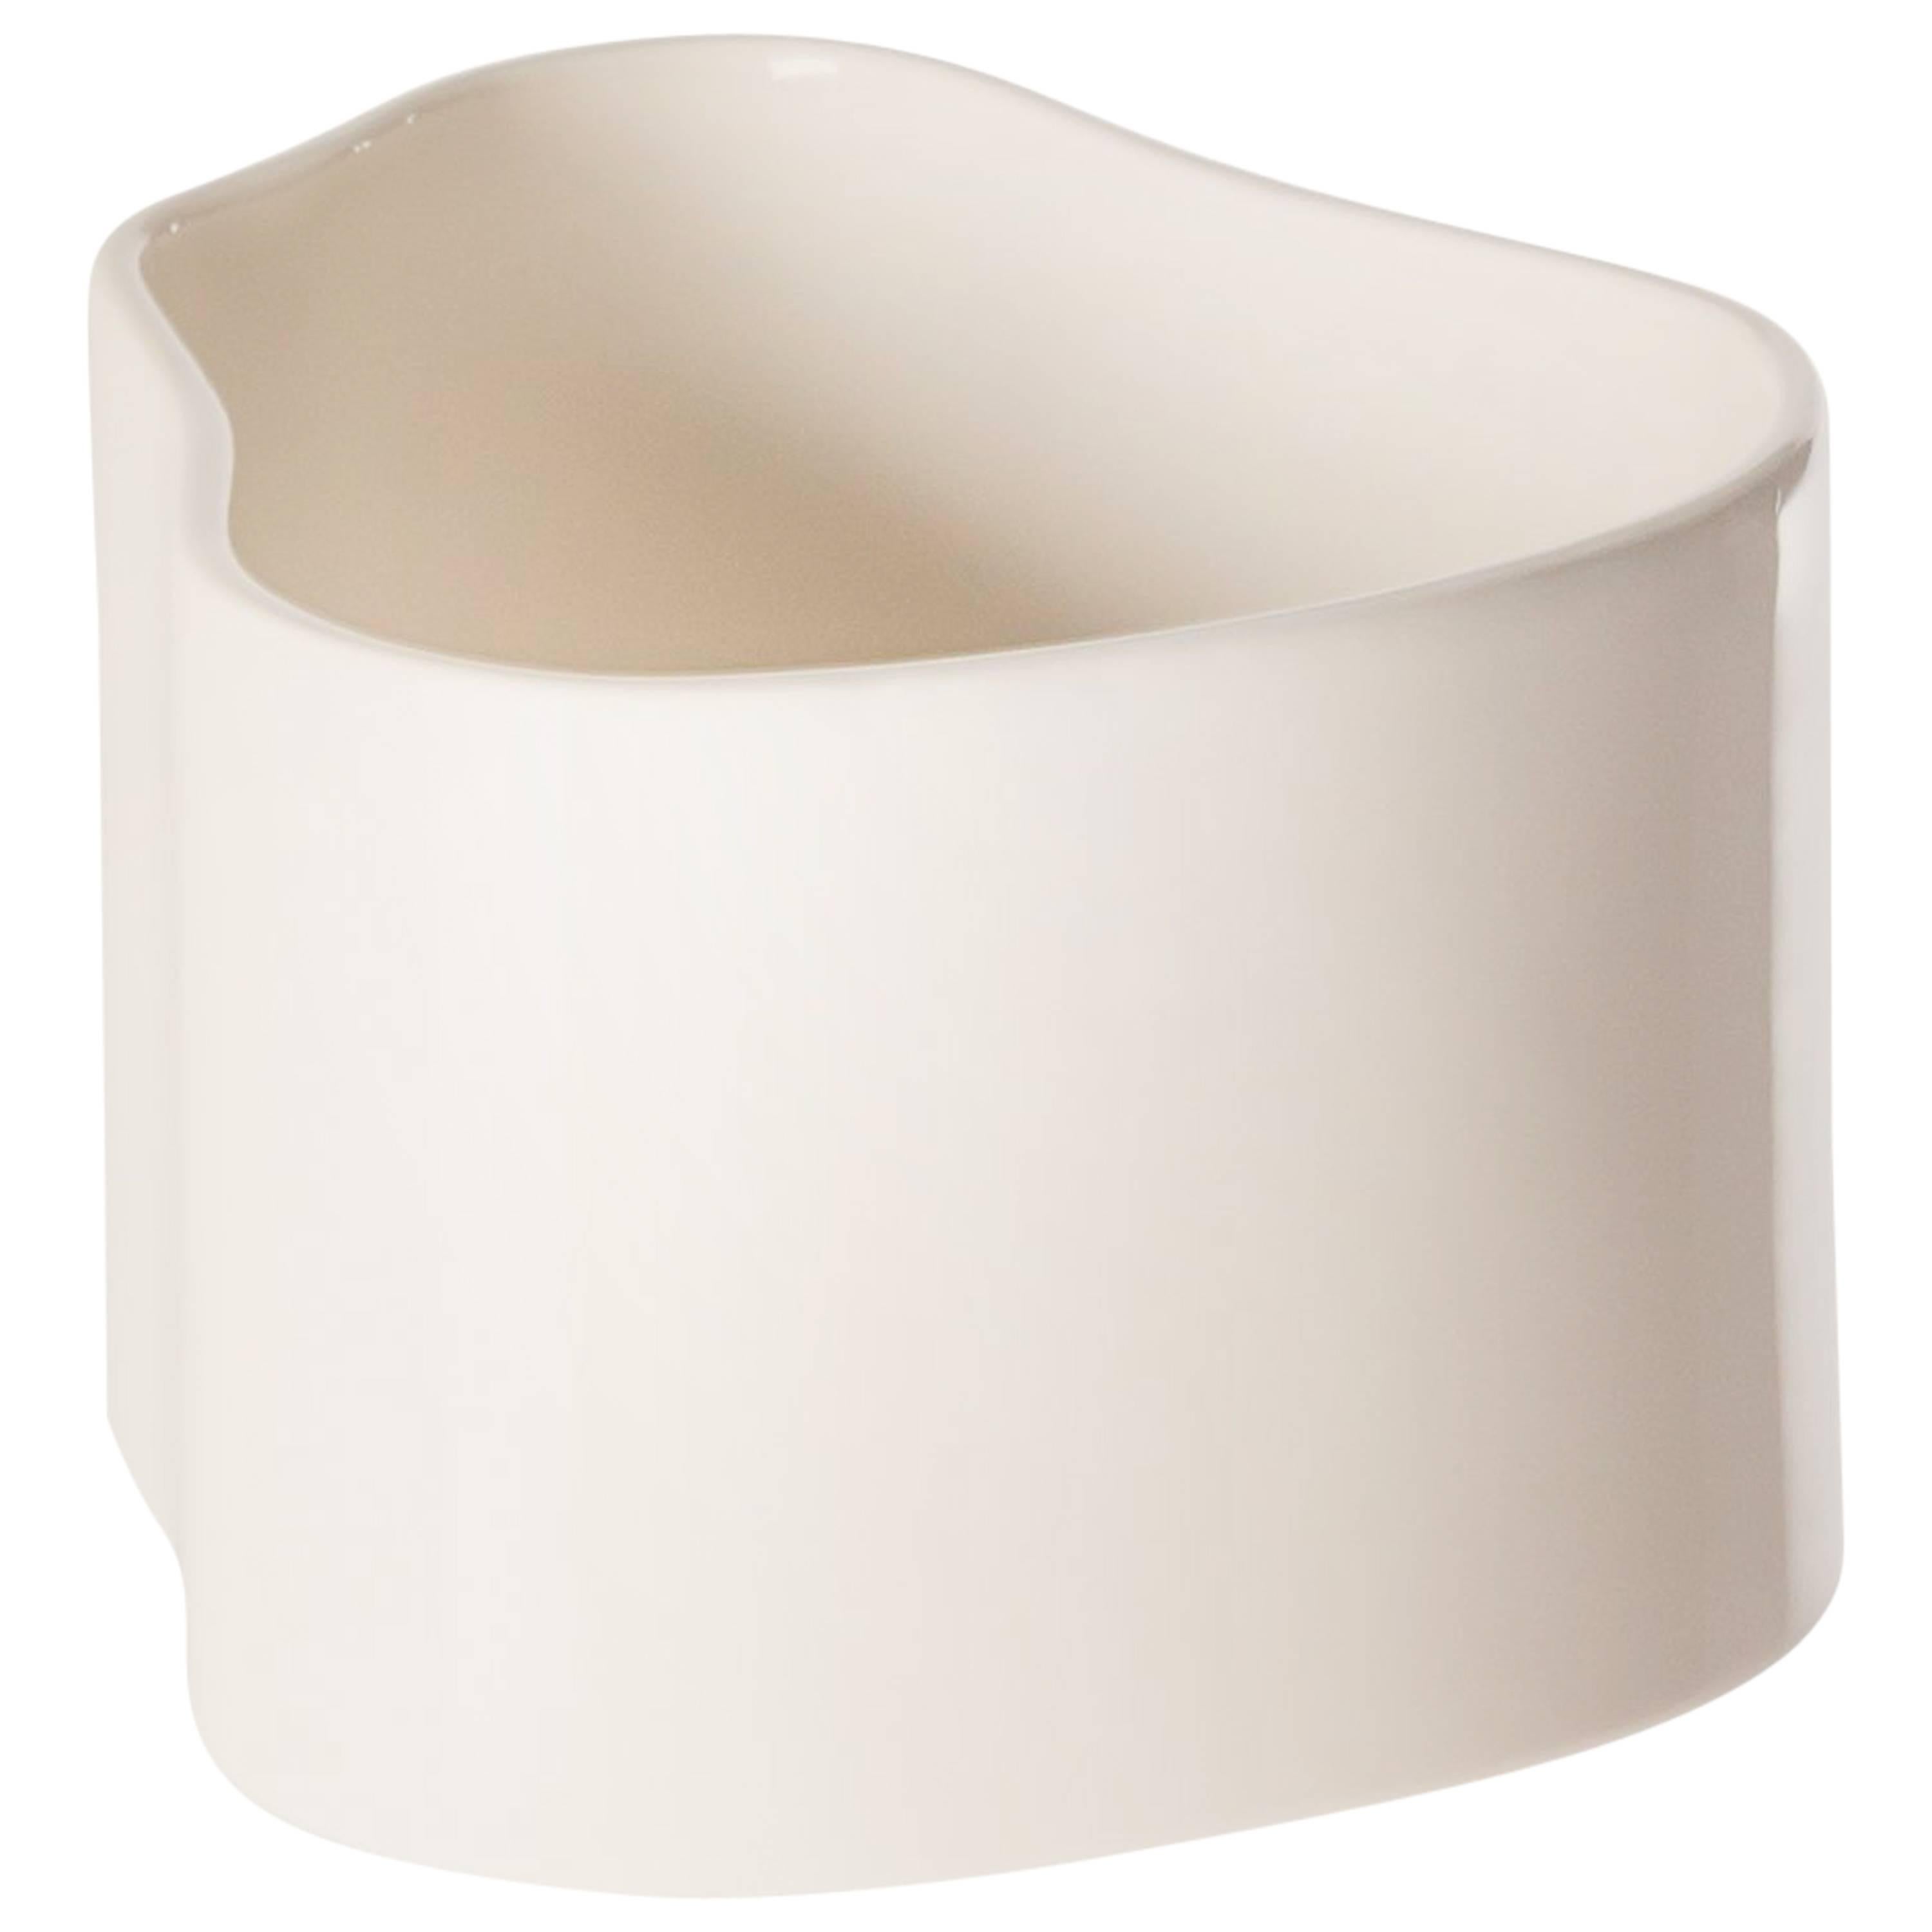 Authentic Small Riihitie Plant Pot A in White by Aino Aalto & Artek im Angebot